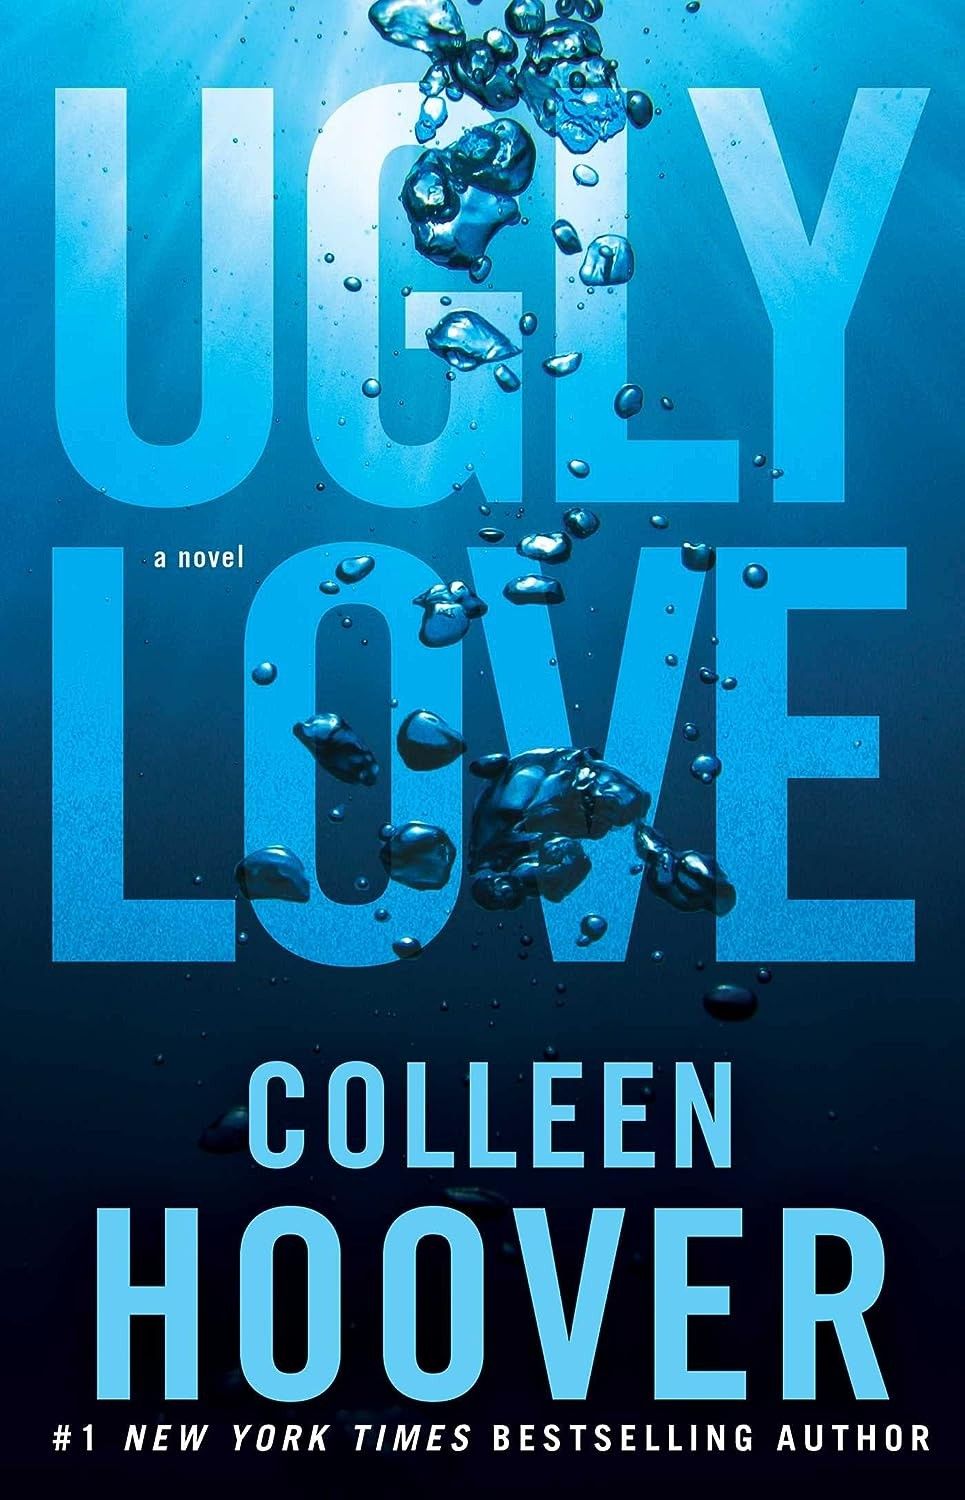 The 10 best Colleen Hoover books, ranked